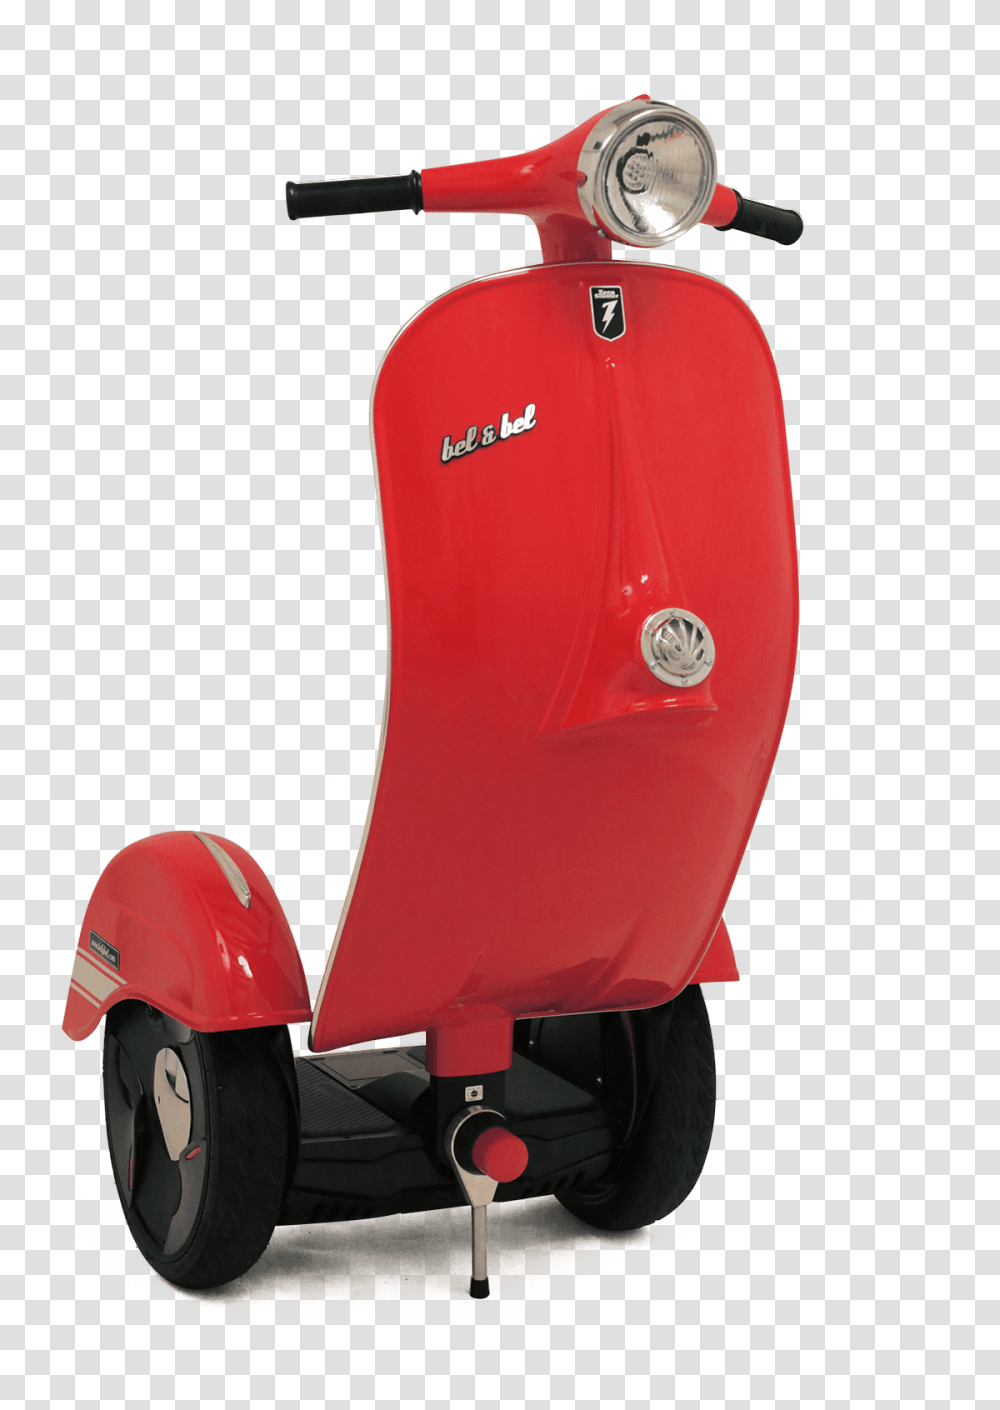 Z Scooter Download Z Scooter, Vehicle, Transportation, Motor Scooter, Motorcycle Transparent Png